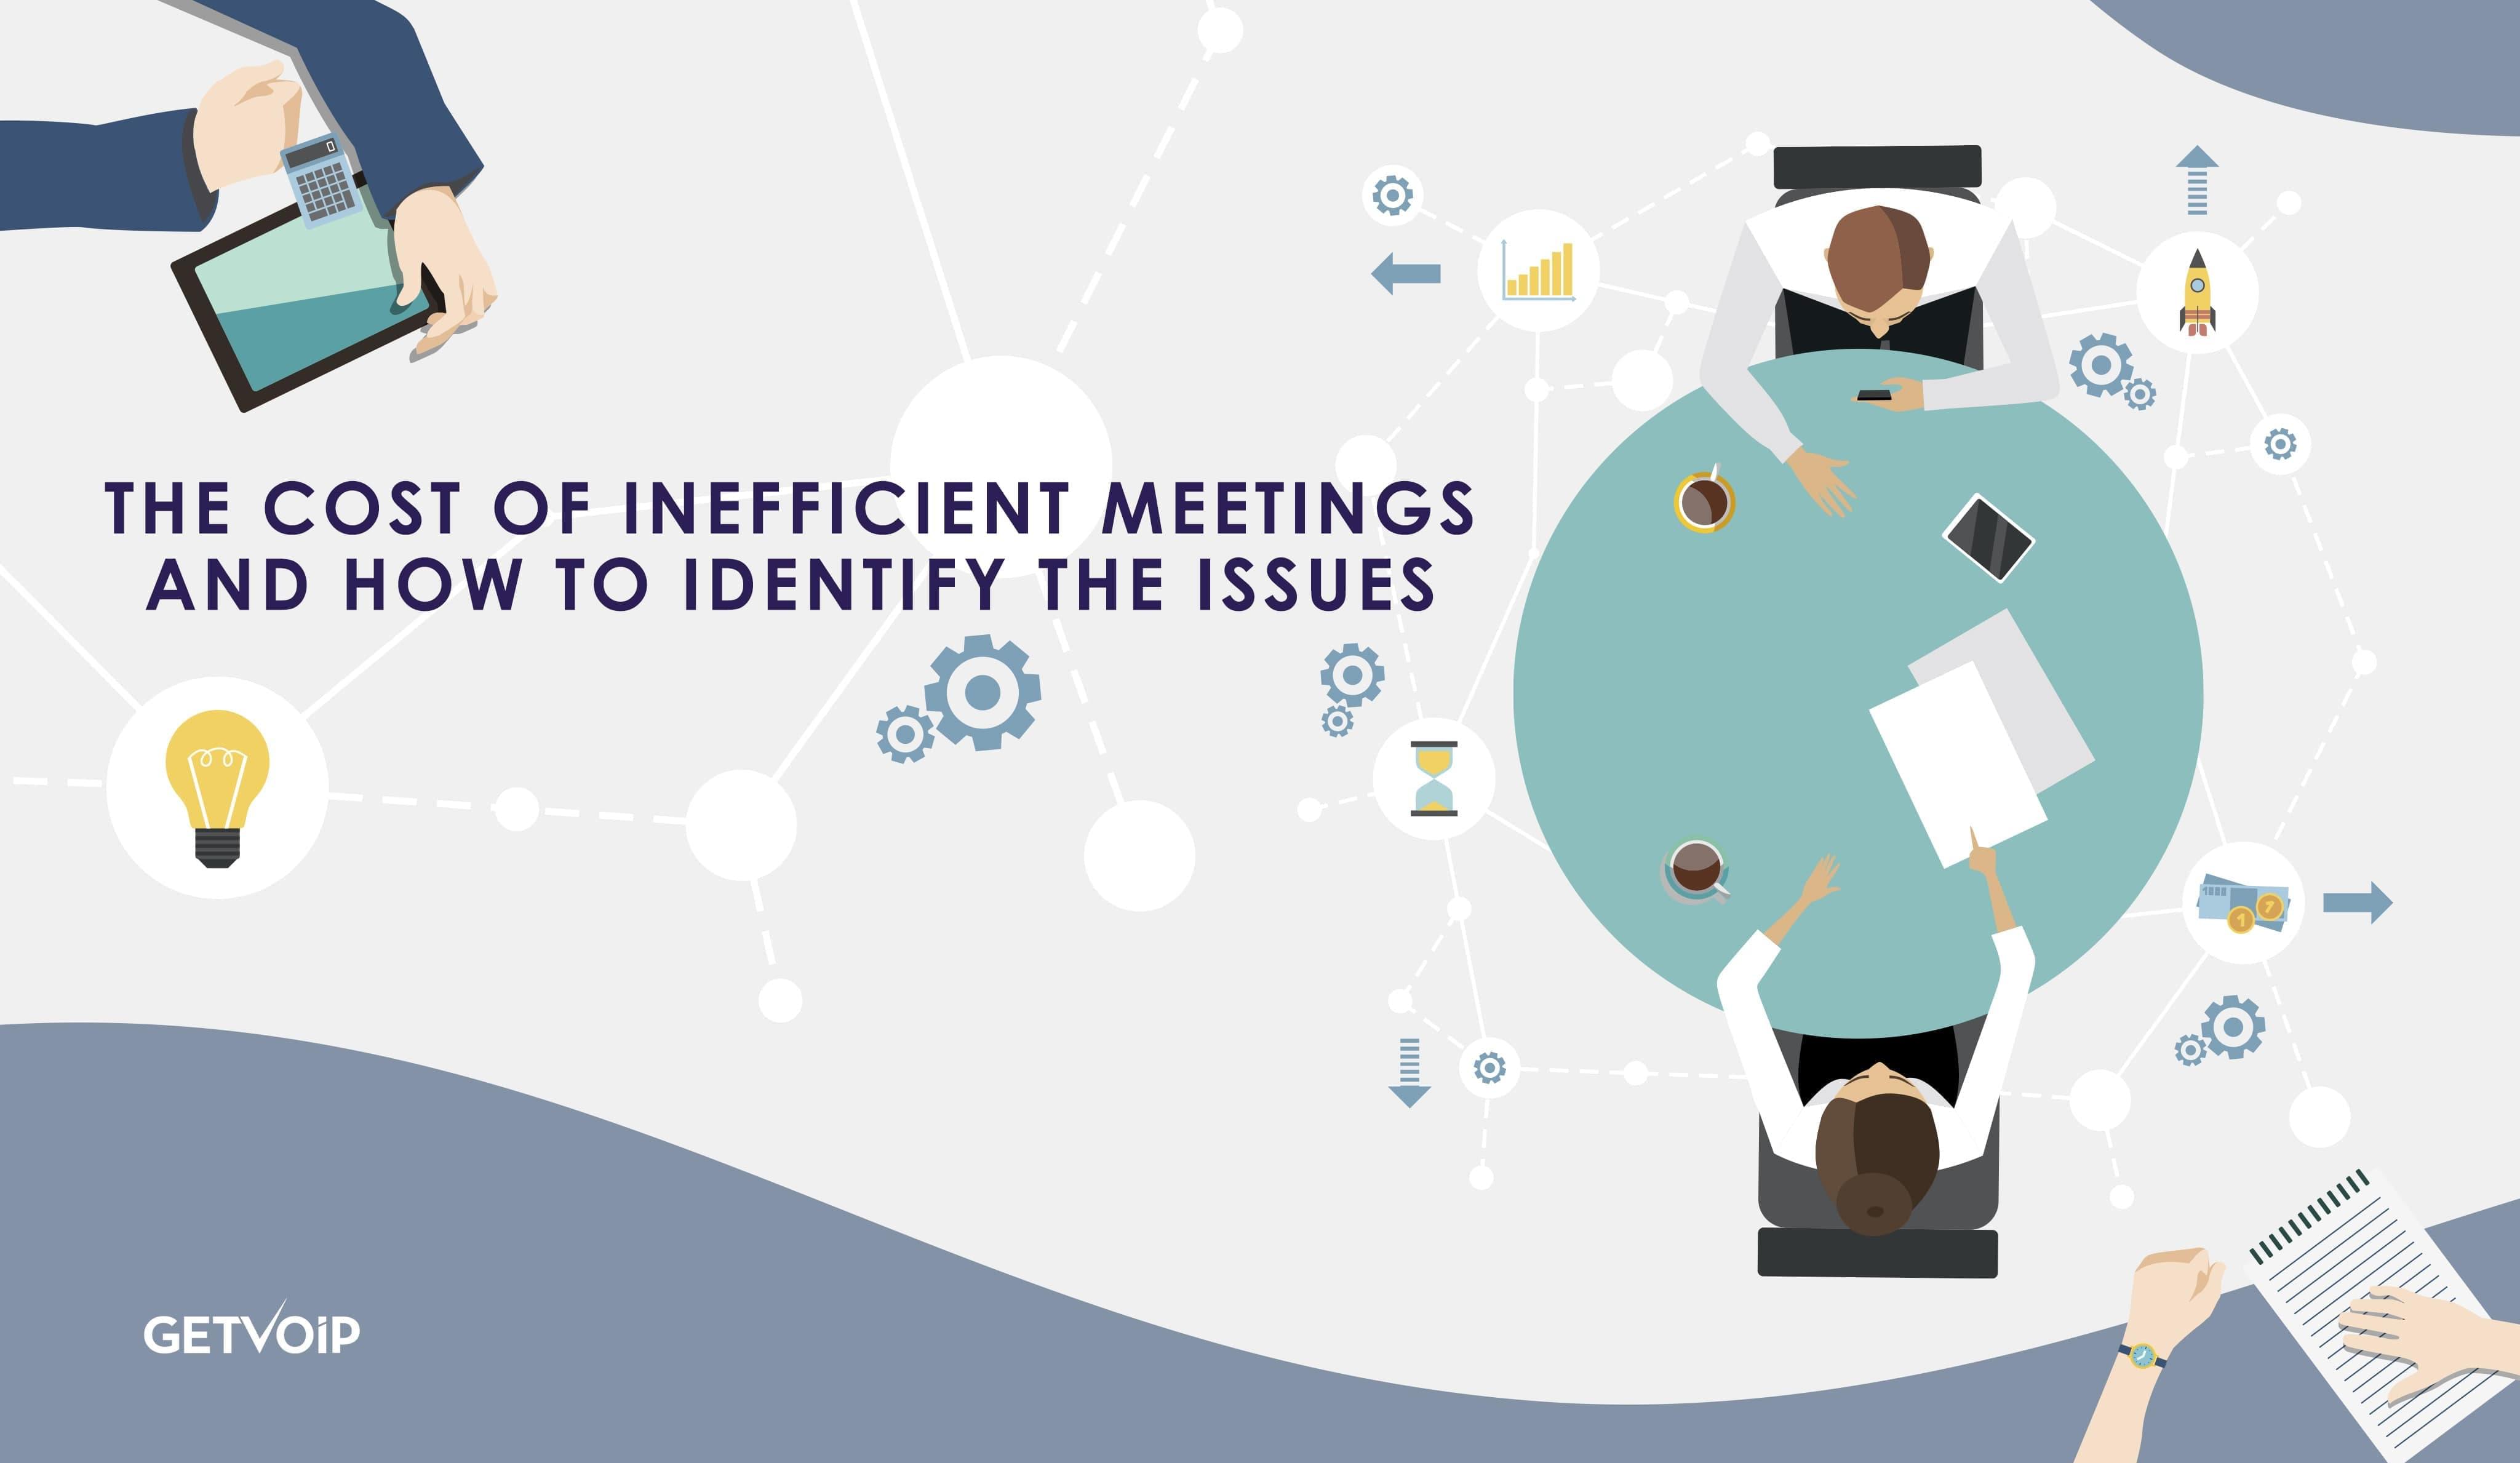 The Cost of Inefficient Meetings and How to Identify the Issues